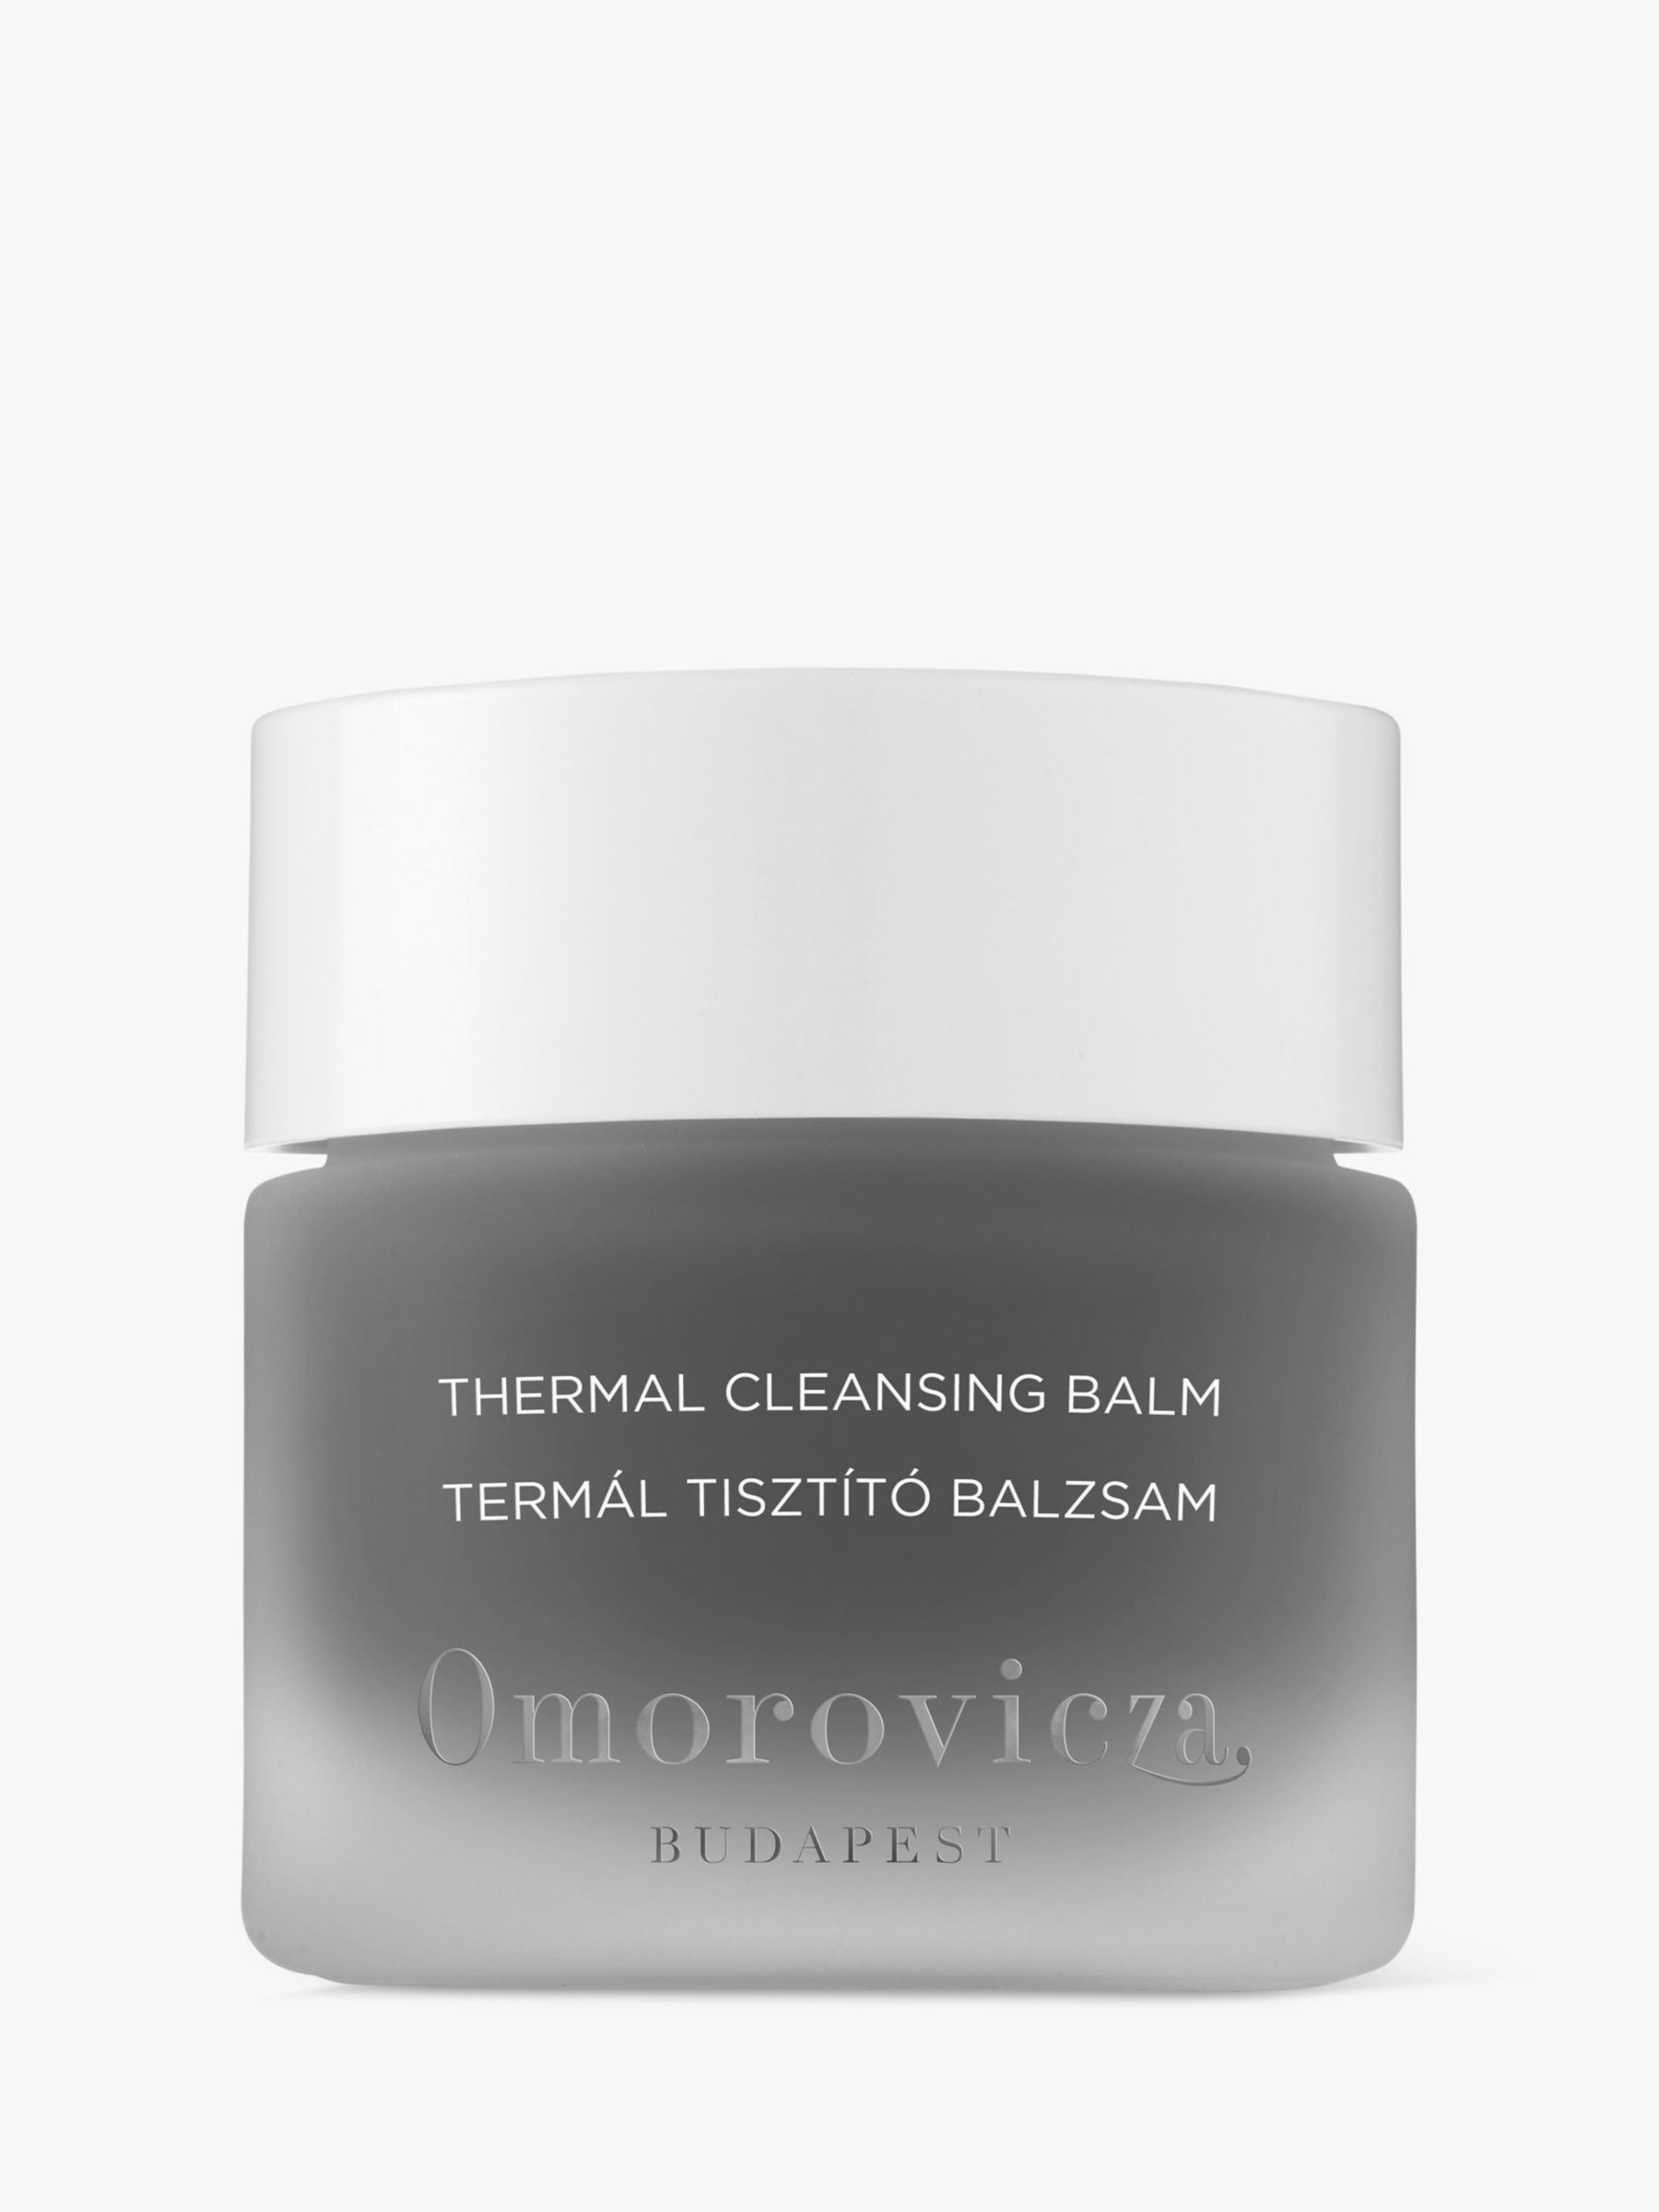 Omorovicza Thermal Cleansing Balm, 50ml 1